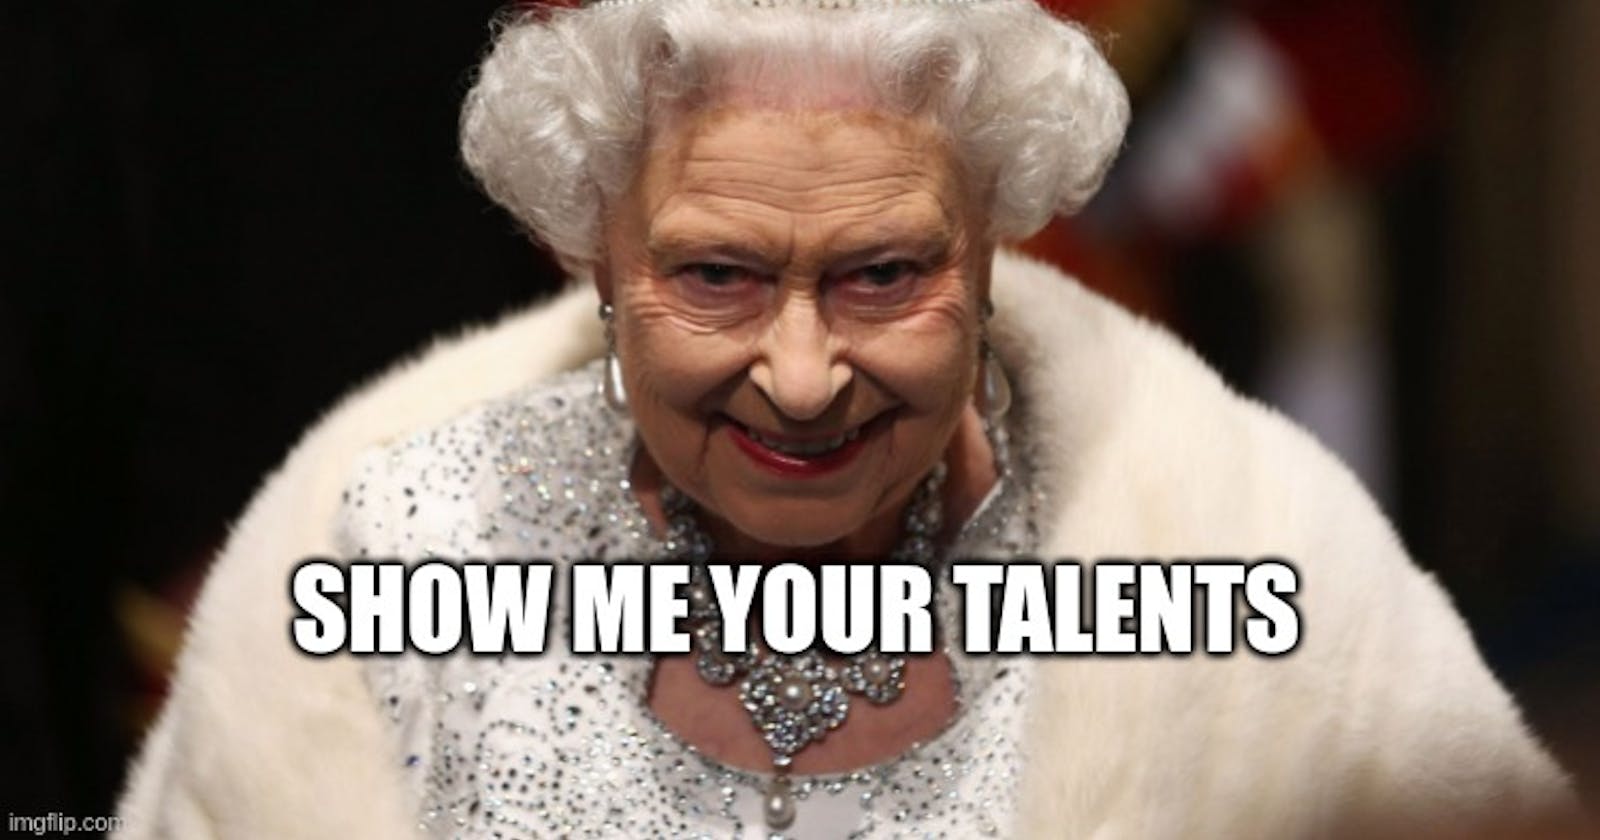 Getting a talent visa in the UK for mortals